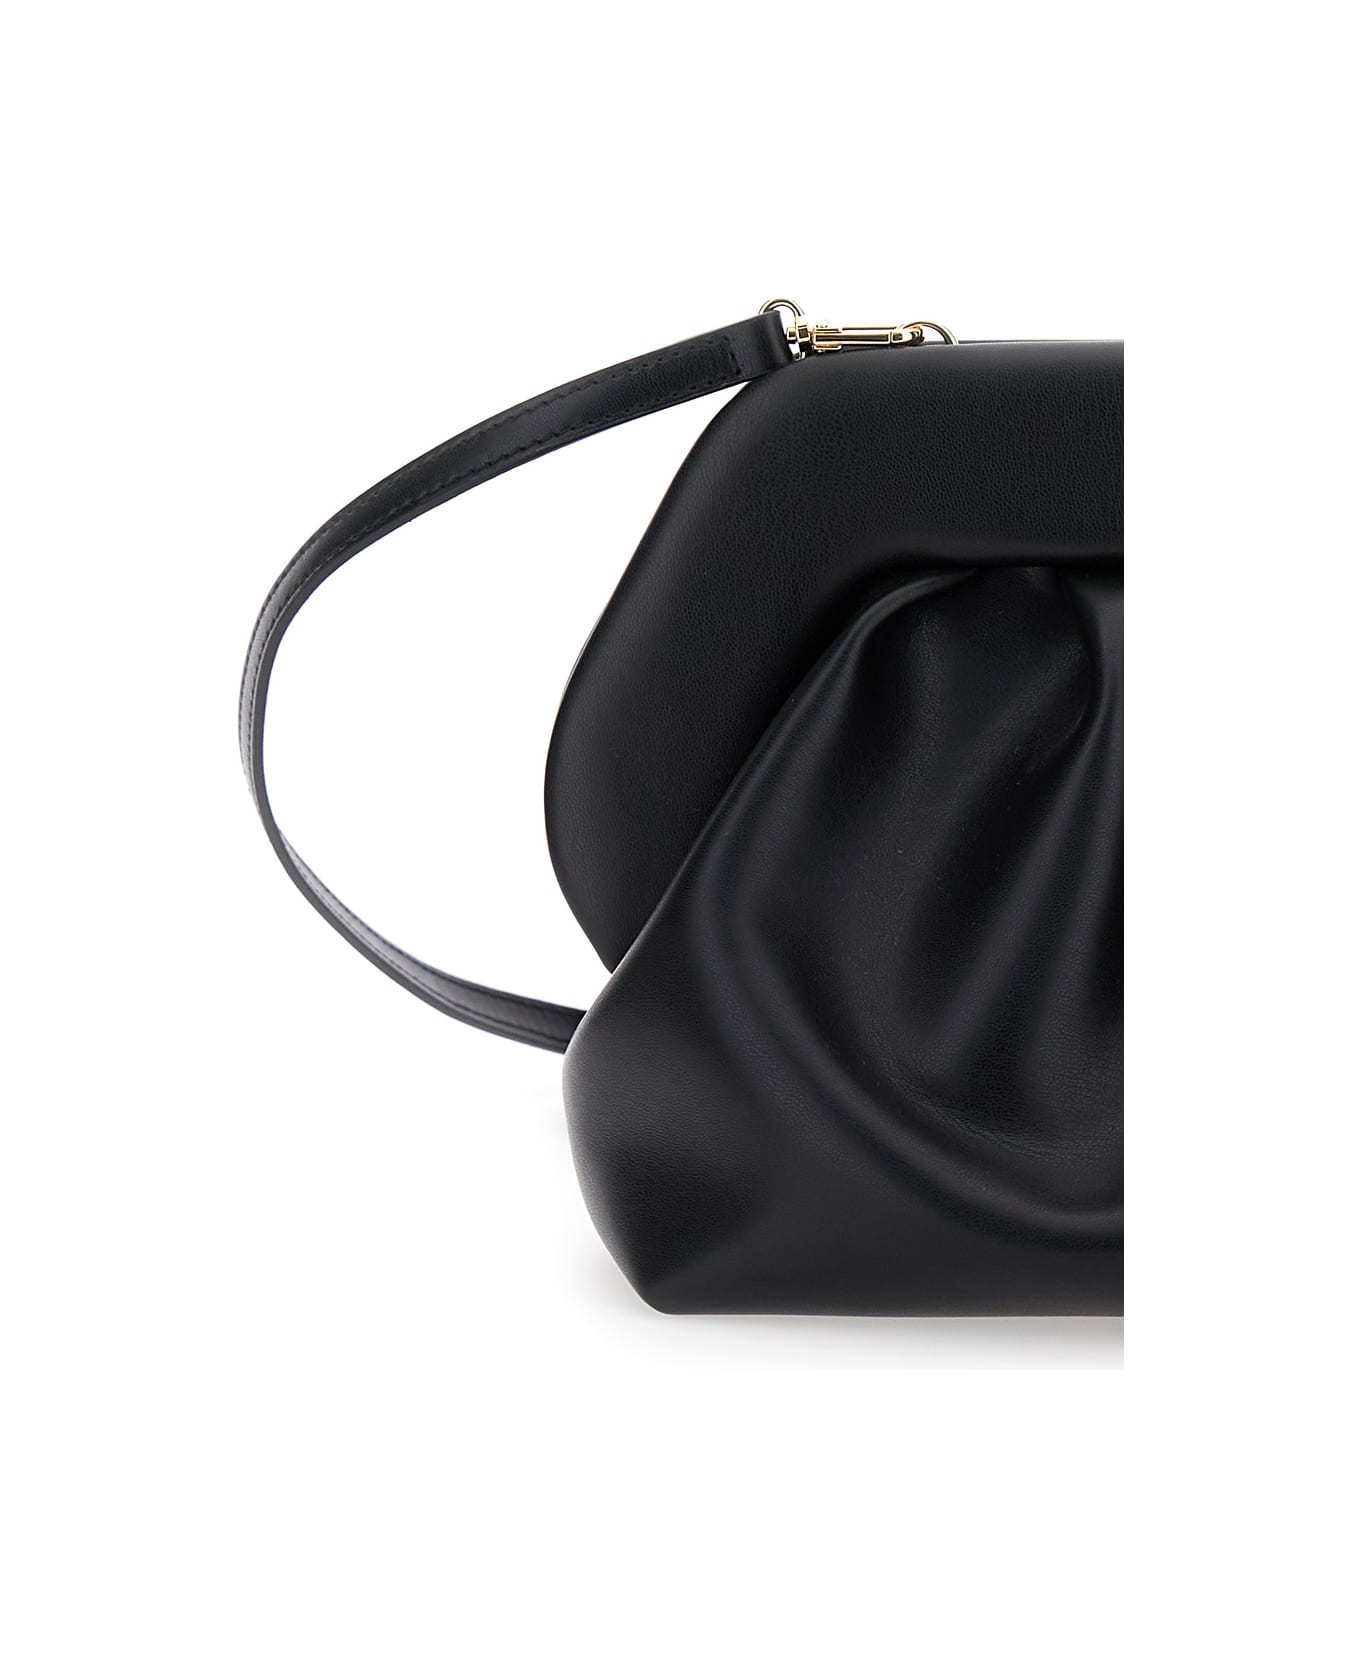 THEMOIRè Black Clutch Bag With Magnetic Closure In Eco Leather Woman - Black クラッチバッグ